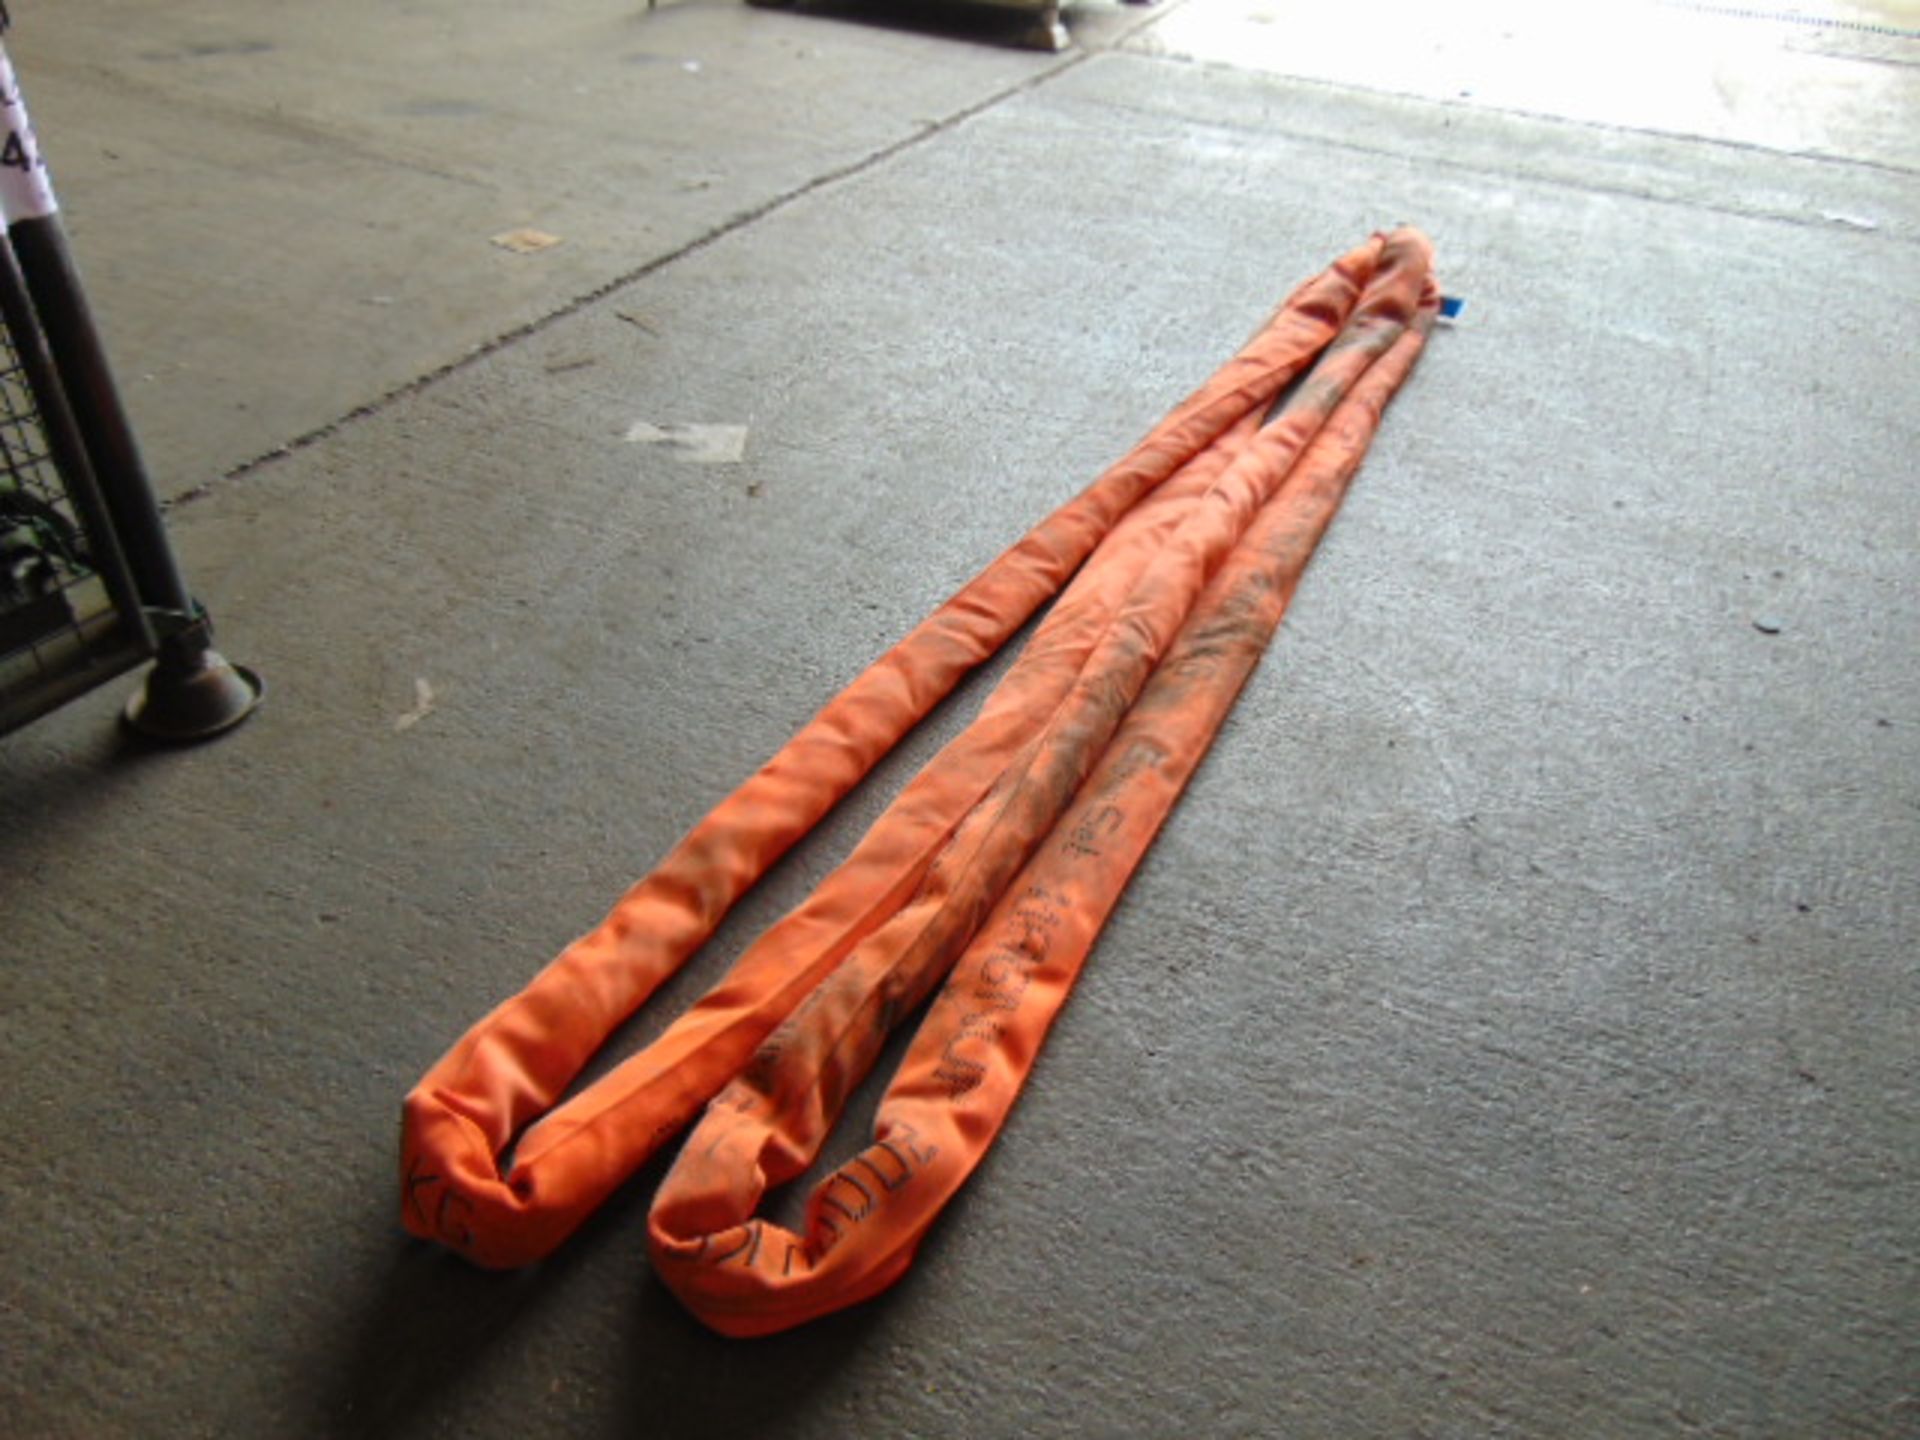 SpanSet Magnum 20,000kg Lifting/Recovery Strop from MOD - Image 5 of 7